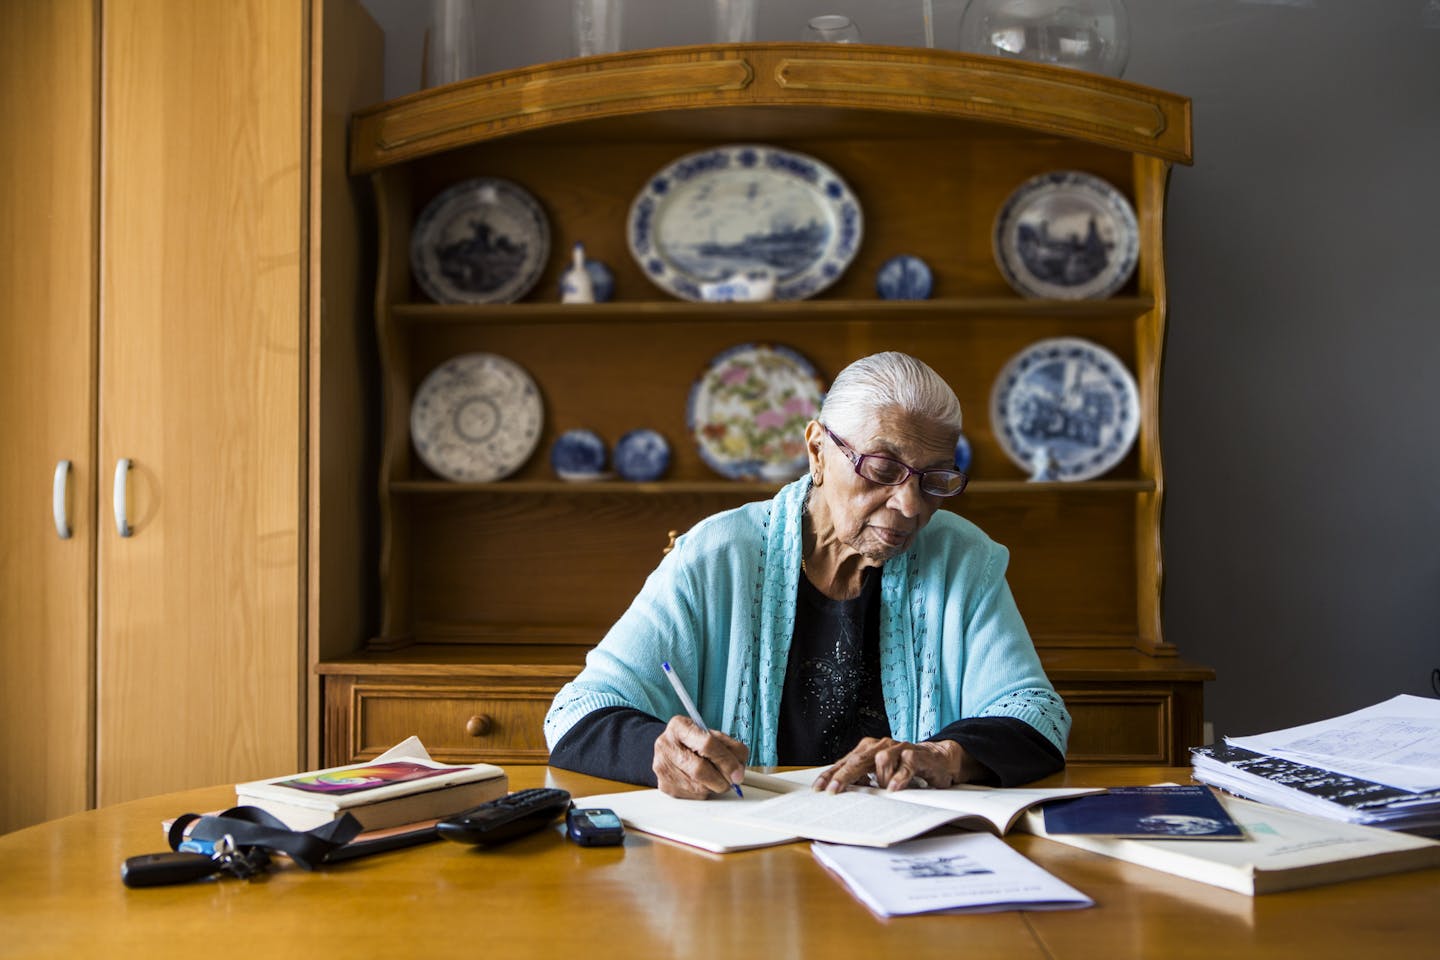 An older Black woman writes as she sits at a dining room table in front of a china cabinet.